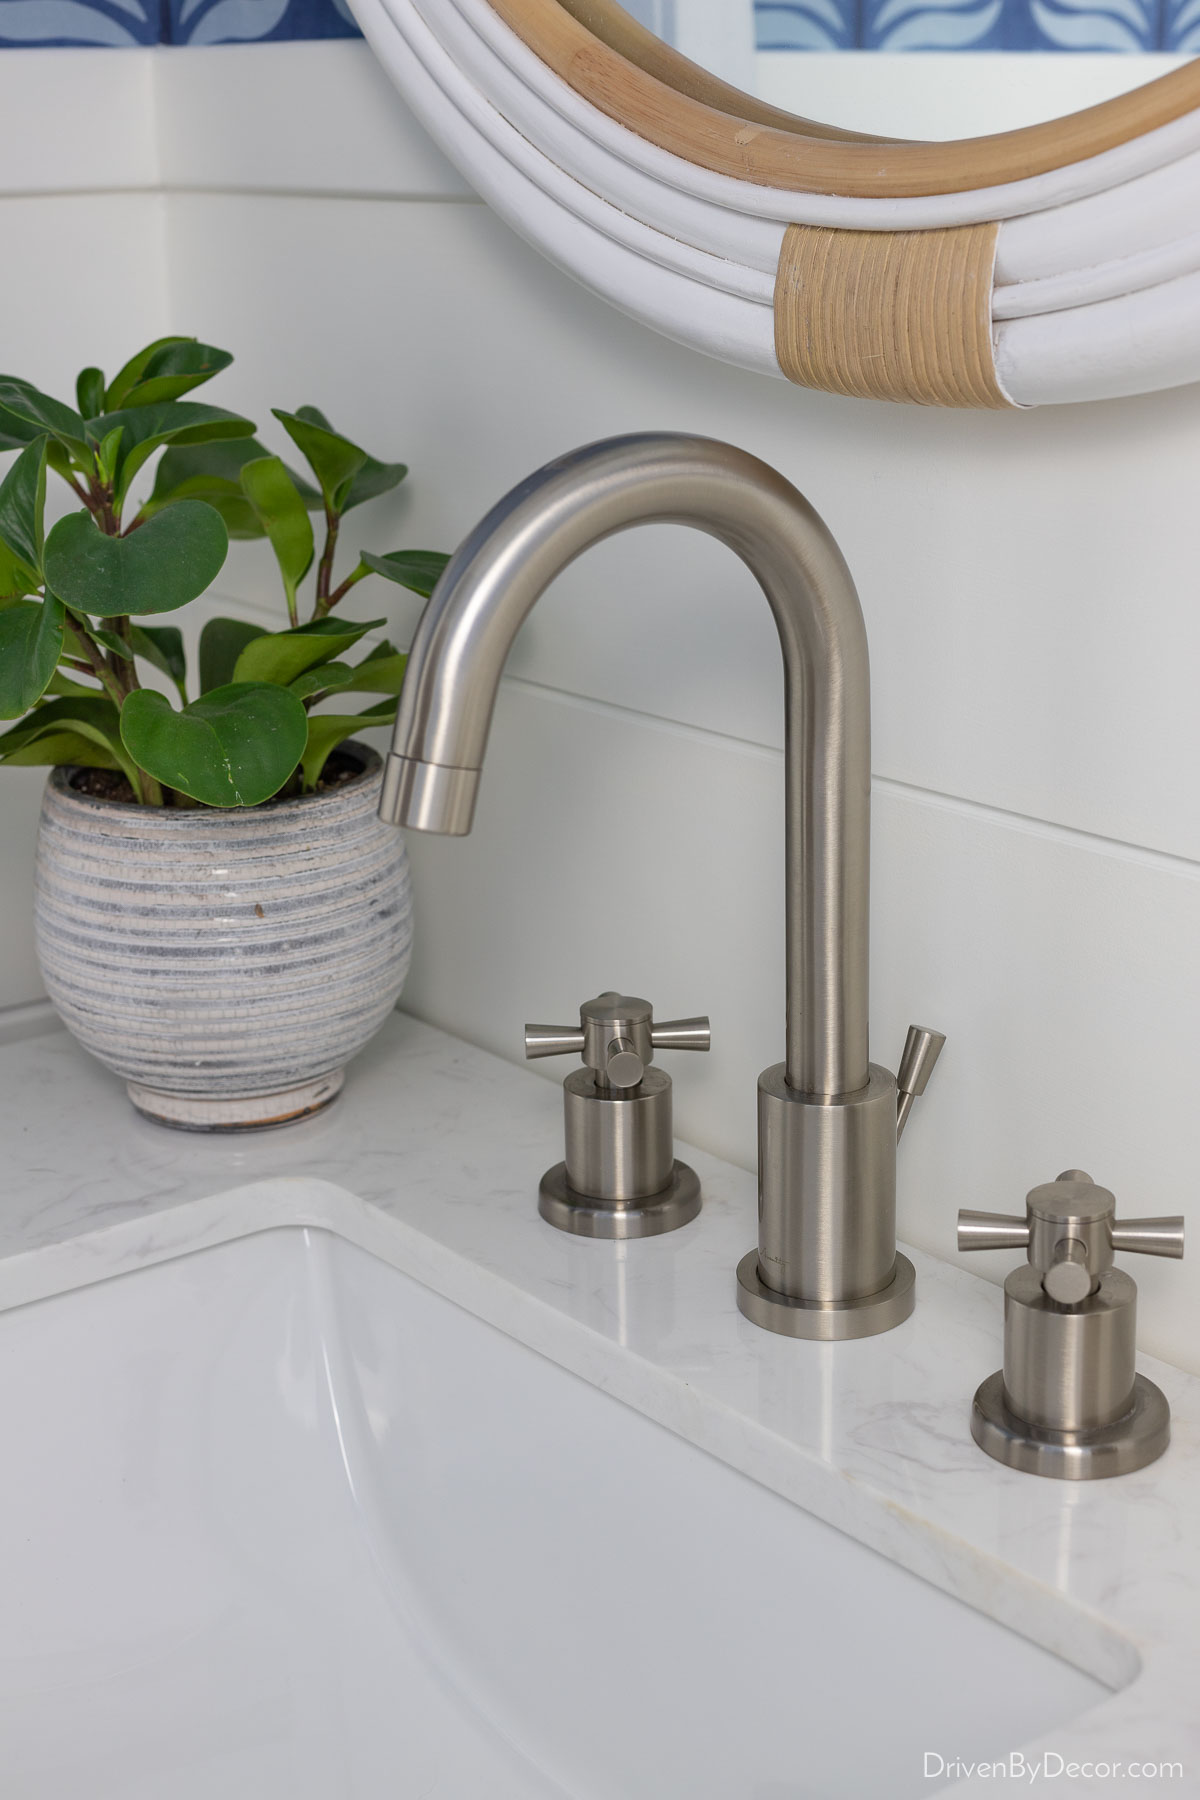 Love this high arched bathroom faucet in brushed nickel